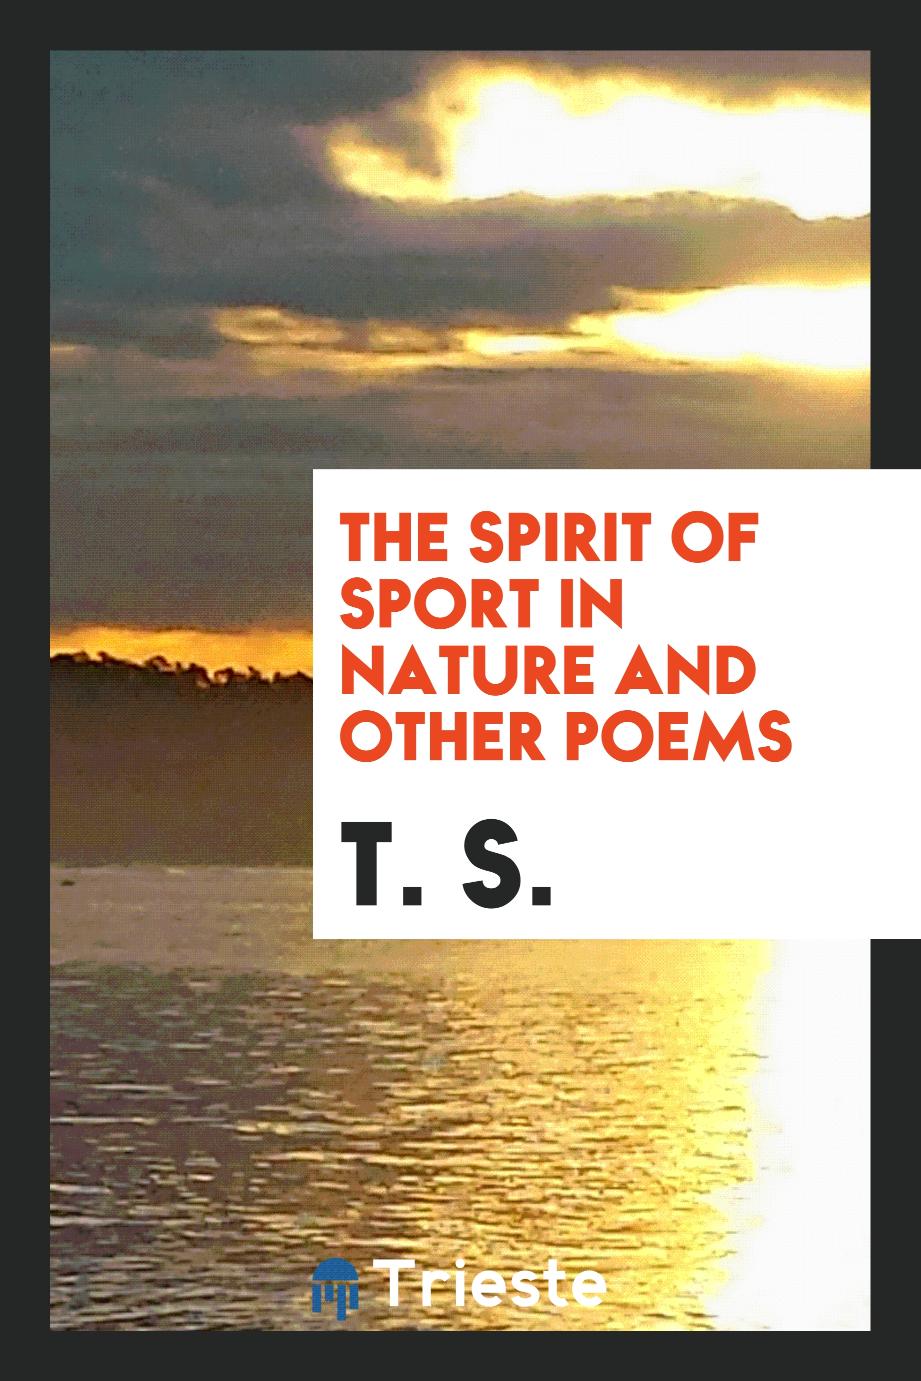 The Spirit of Sport in Nature and Other Poems